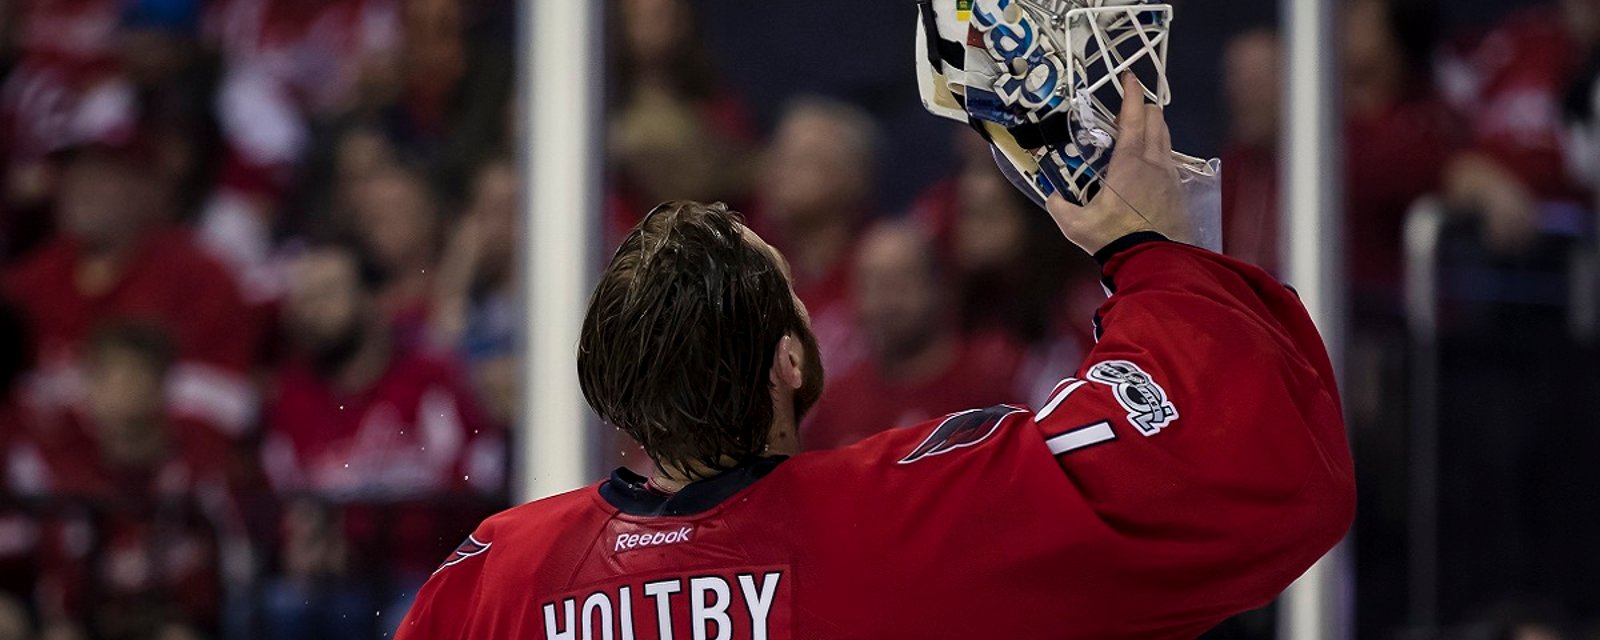 Holtby charges out of his net like a madman to stop breakaway!